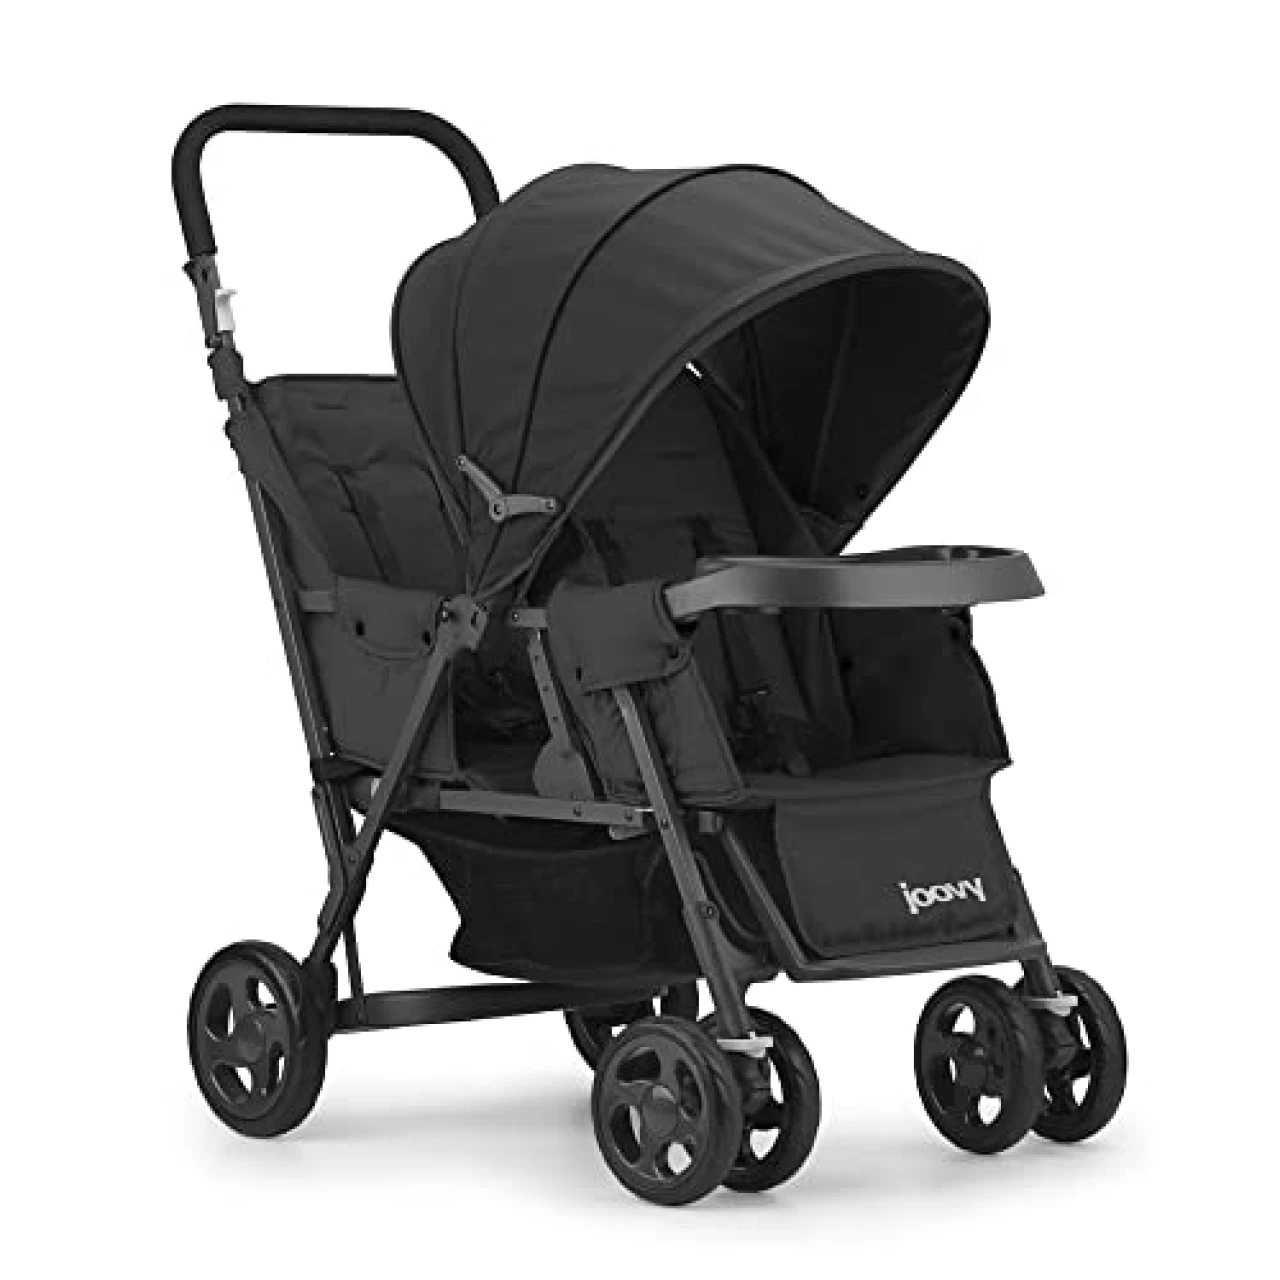 Joovy Caboose Too Sit and Stand Double Stroller (Black)